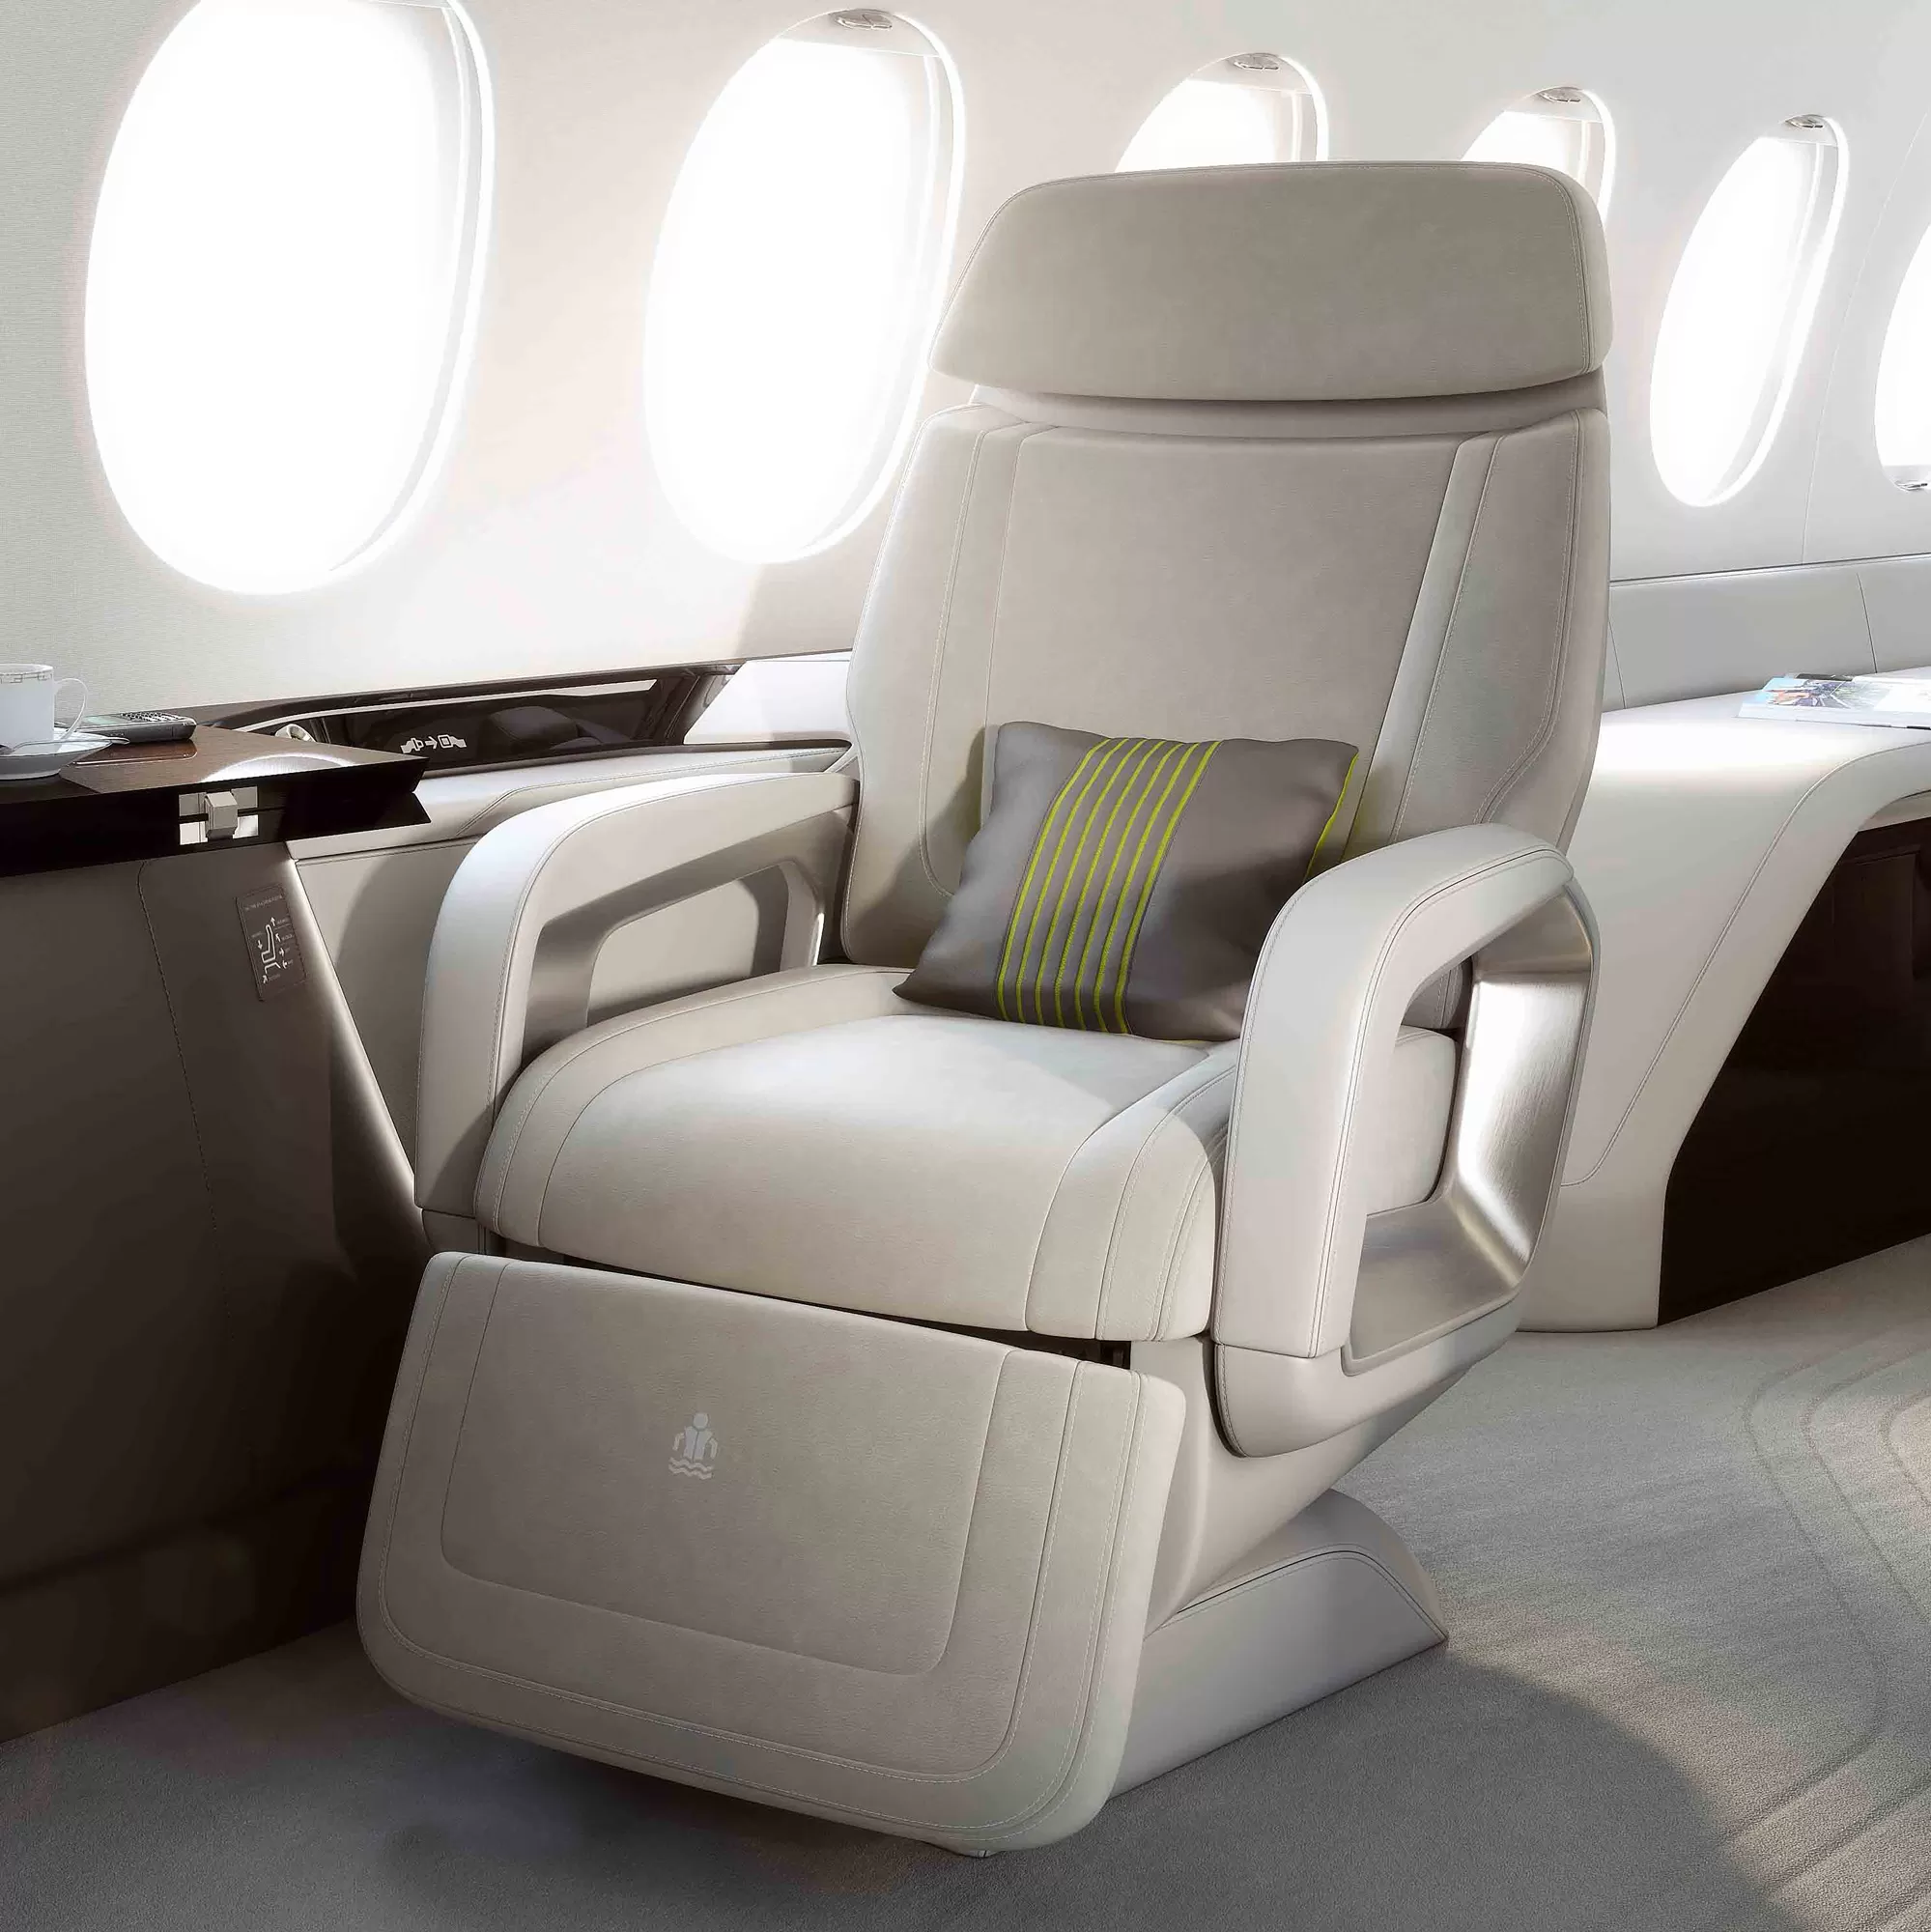 A row of business class seats equipped with comfort features in an airplane.